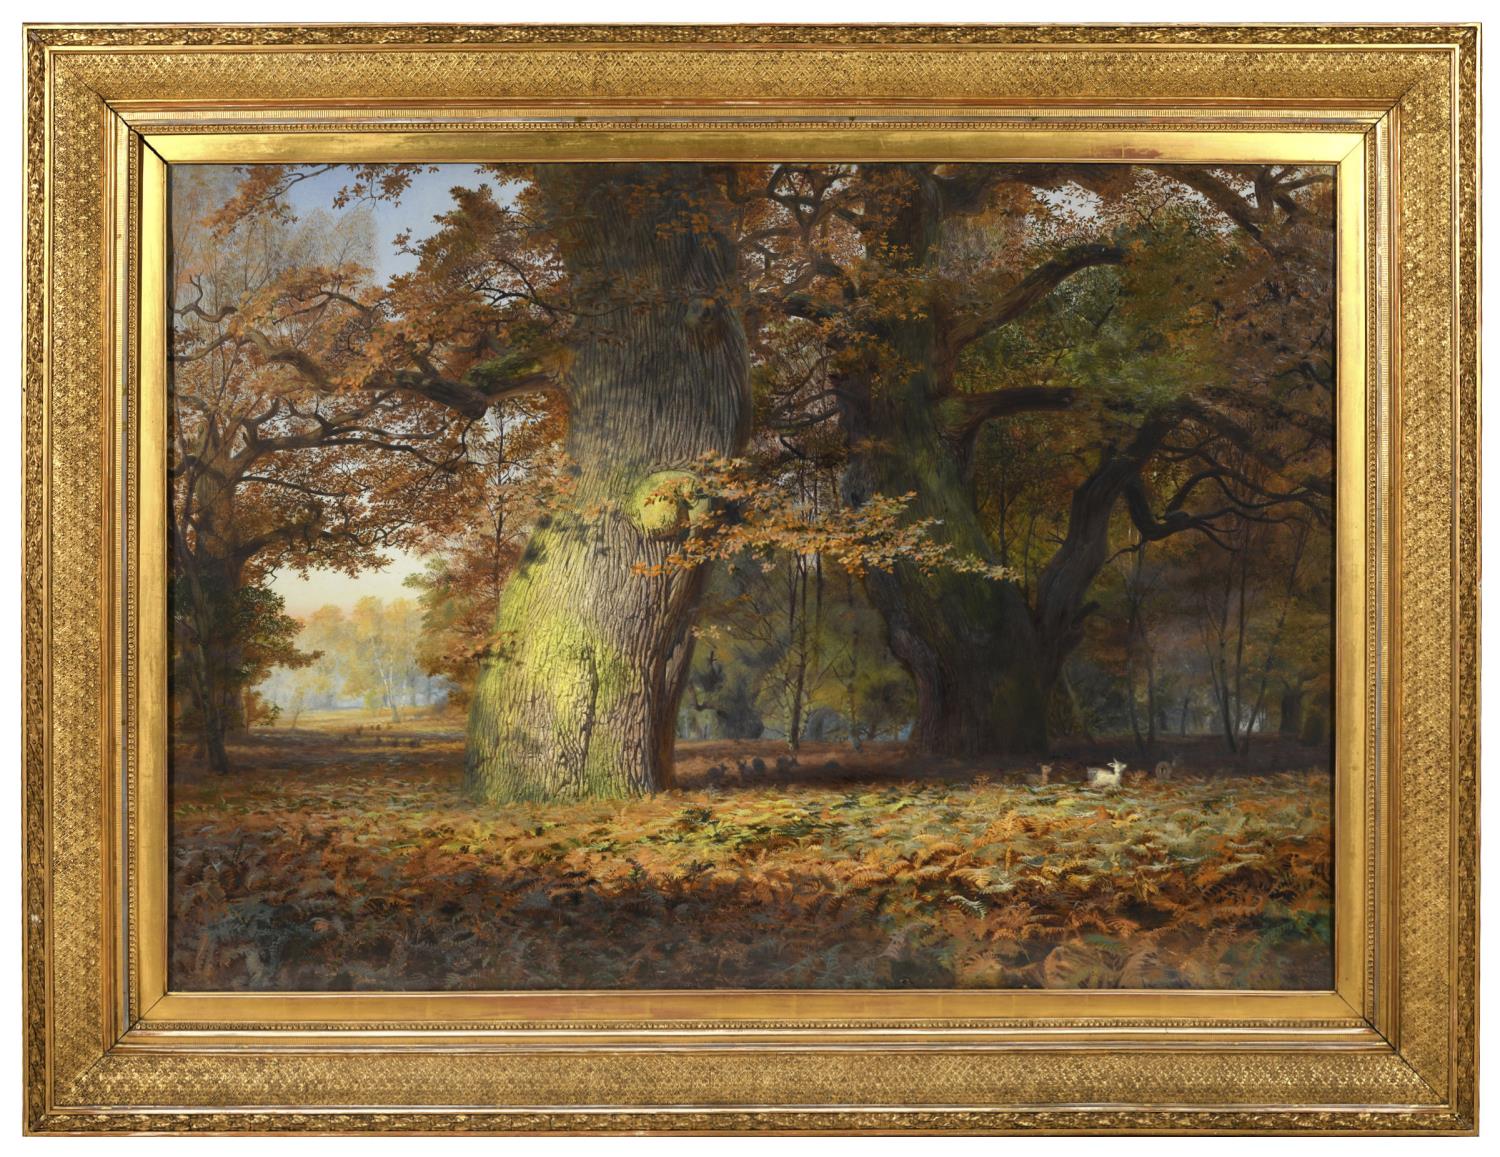 ANDREW MACCALLUM (1821-1902) FALLOW DEER IN A FOREST Signed and dated 1866, oil on canvas 92 x 130.